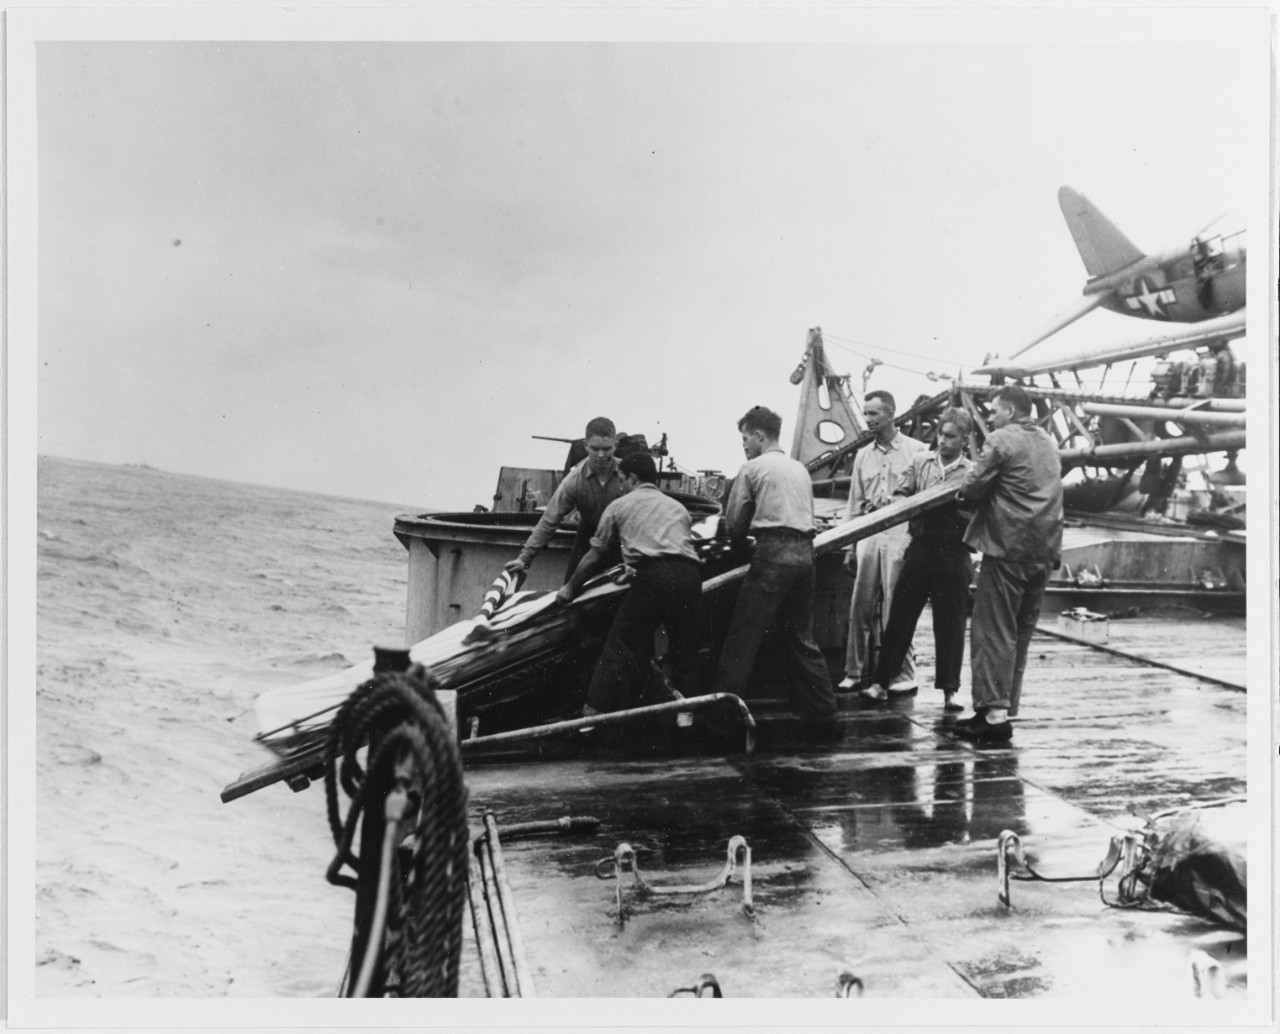 Burial at sea for crewmen killed when the ship was torpedoed off Formosa on 14 October 1944. Photographed while Houston was under tow on 15 October. 